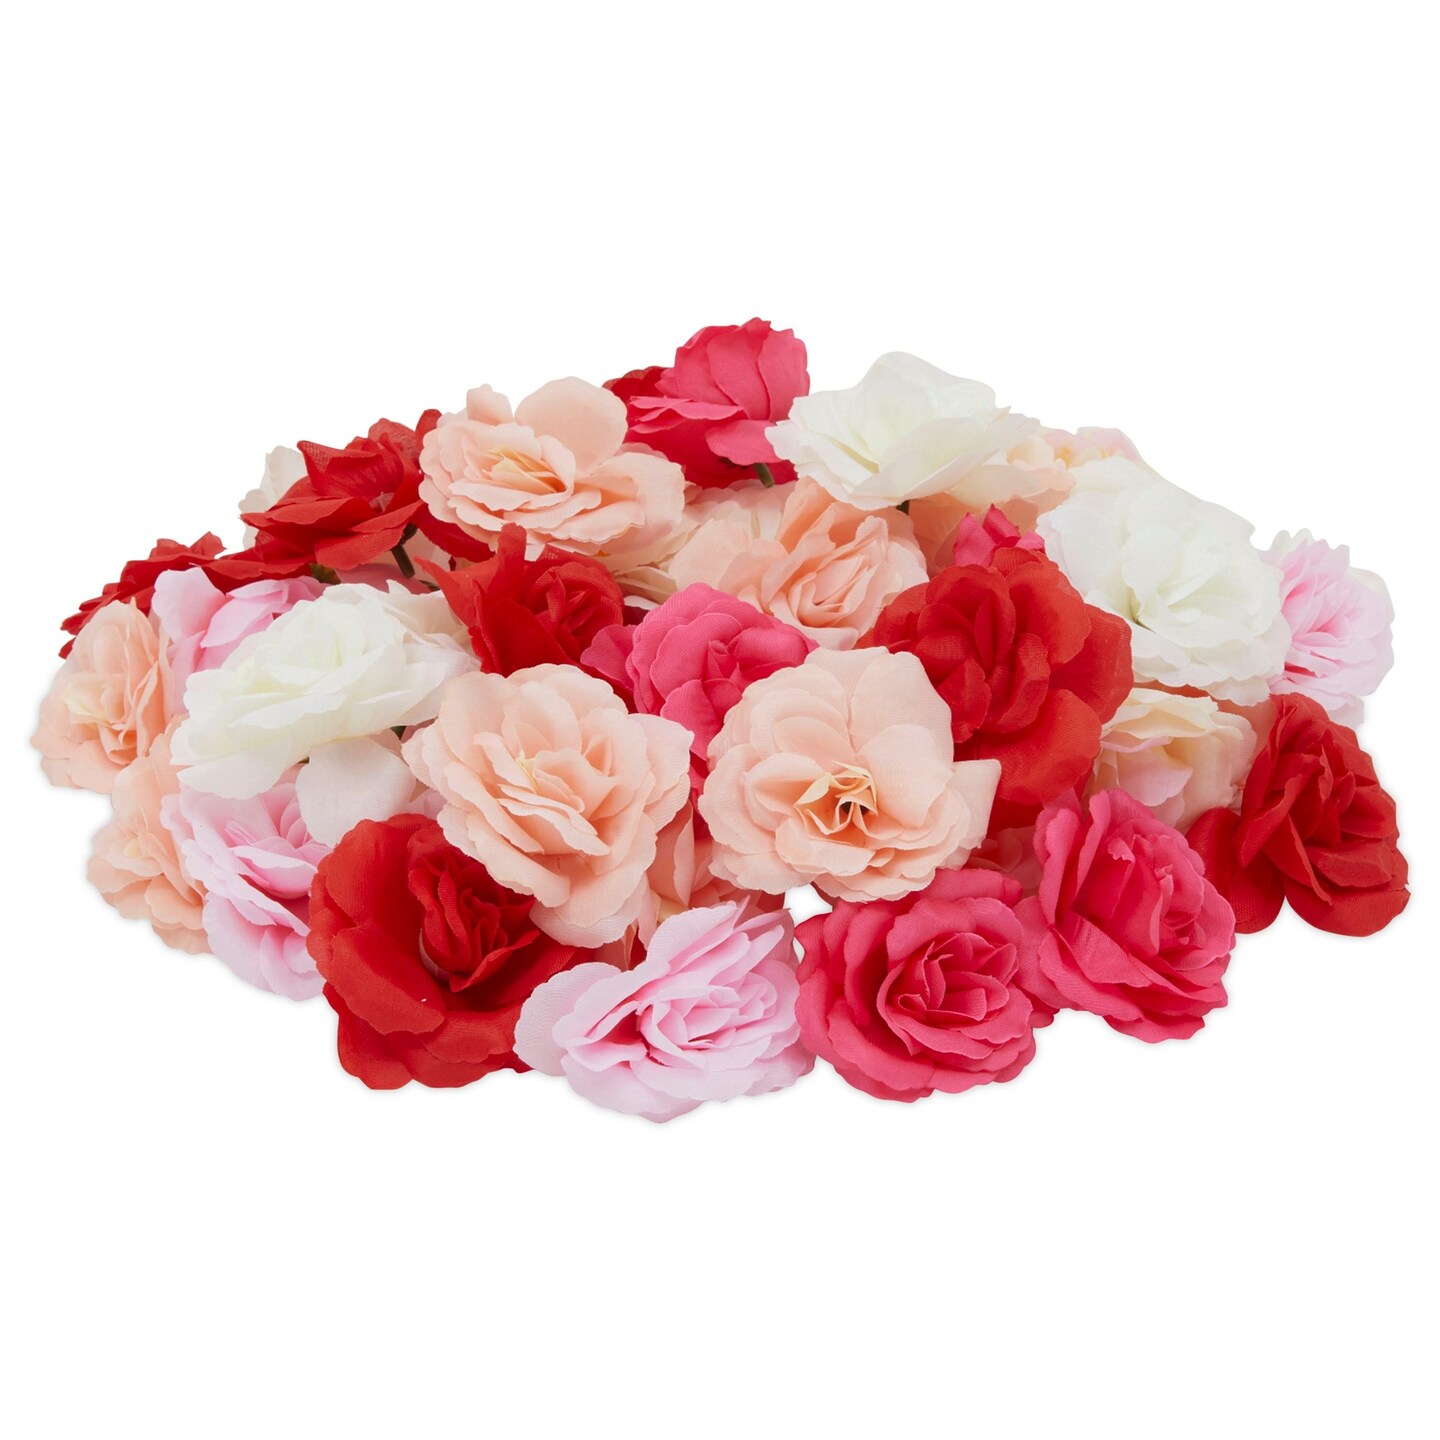 60 Pack 3 Inch Artificial Flower Heads for Crafts, Loose Fake Flowers, Bulk  for Valentines, Wedding Decorations, Baby Showers, Pink and White